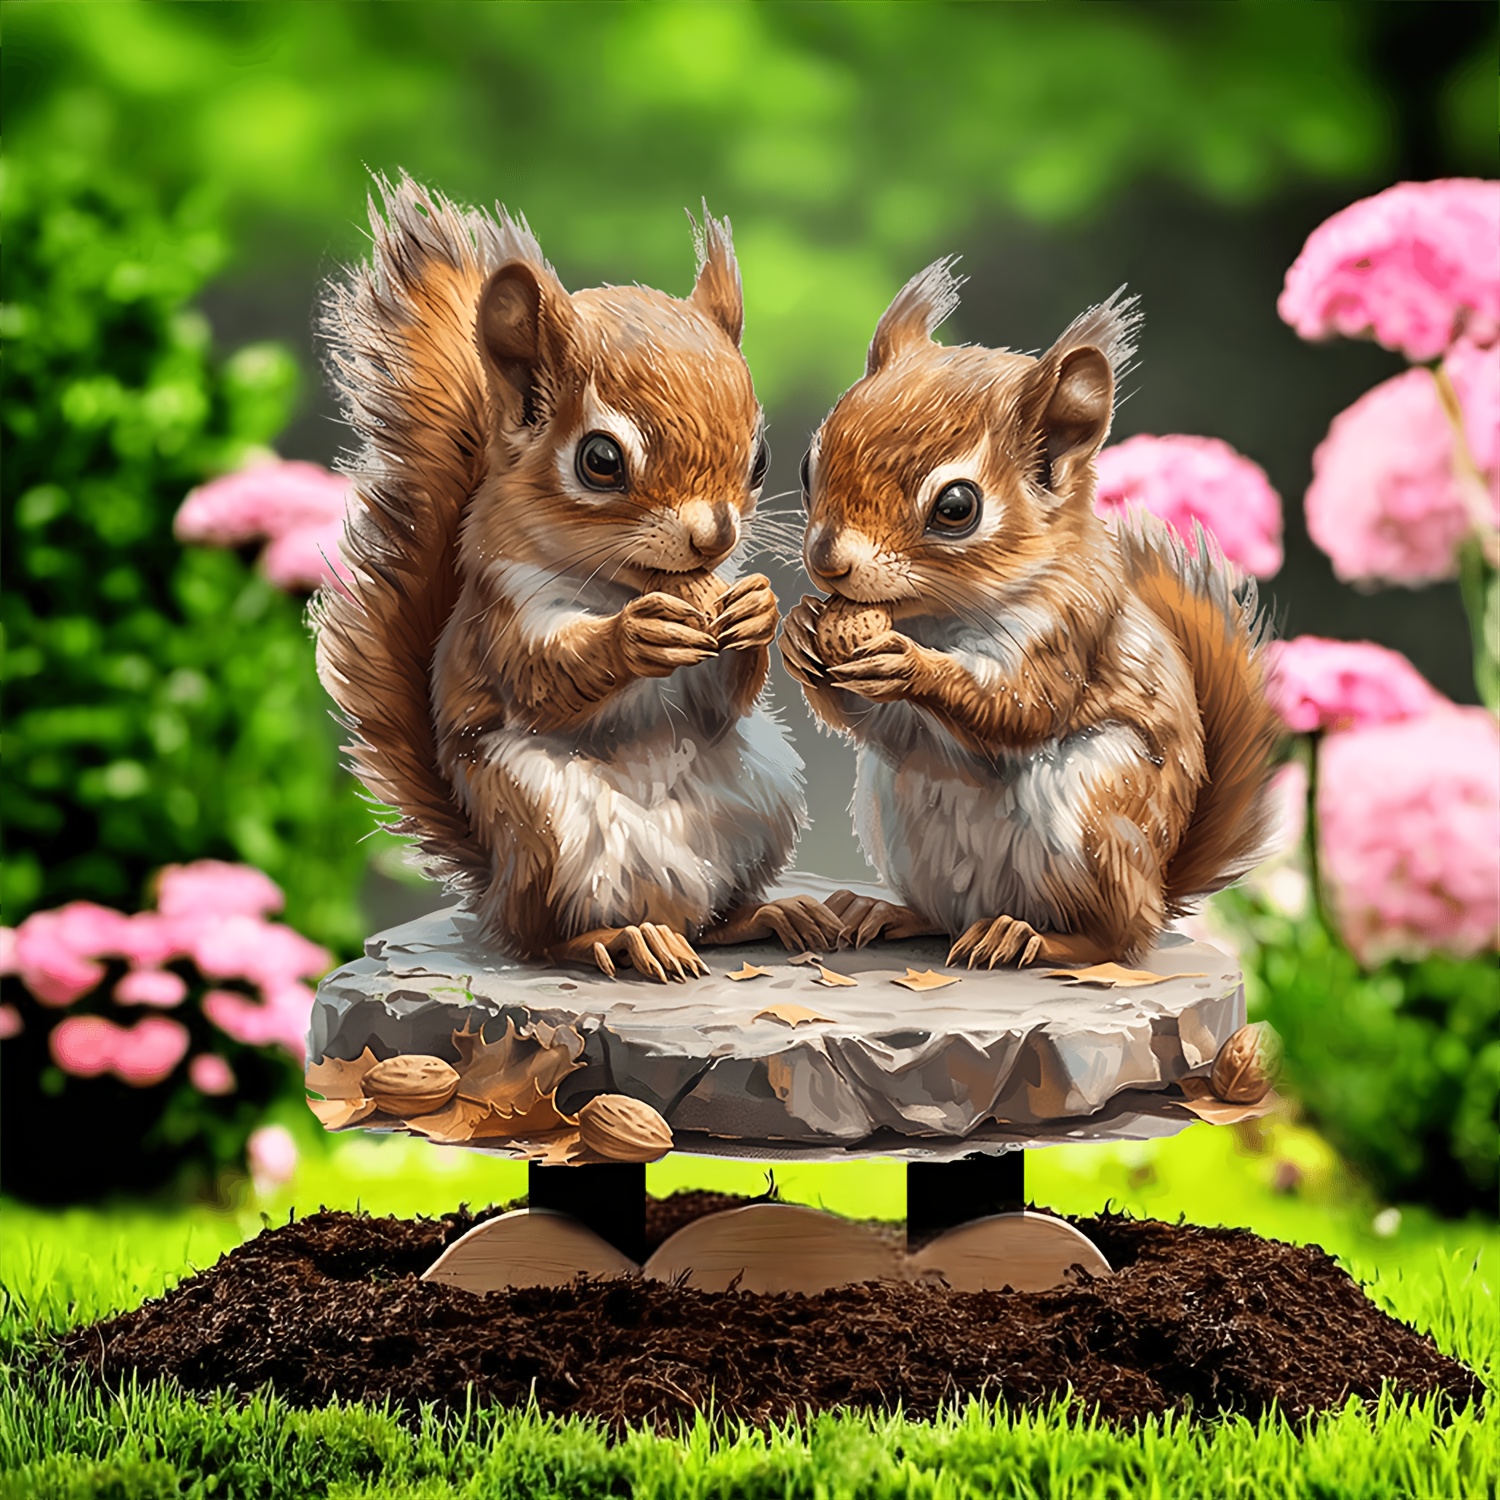 

Charming Squirrel With Nuts Acrylic Garden Stake - Perfect For Outdoor Decor, Flower Pots & Sun Catchers, 7.8" X 5.7" - Ideal Gift For Home & Porch